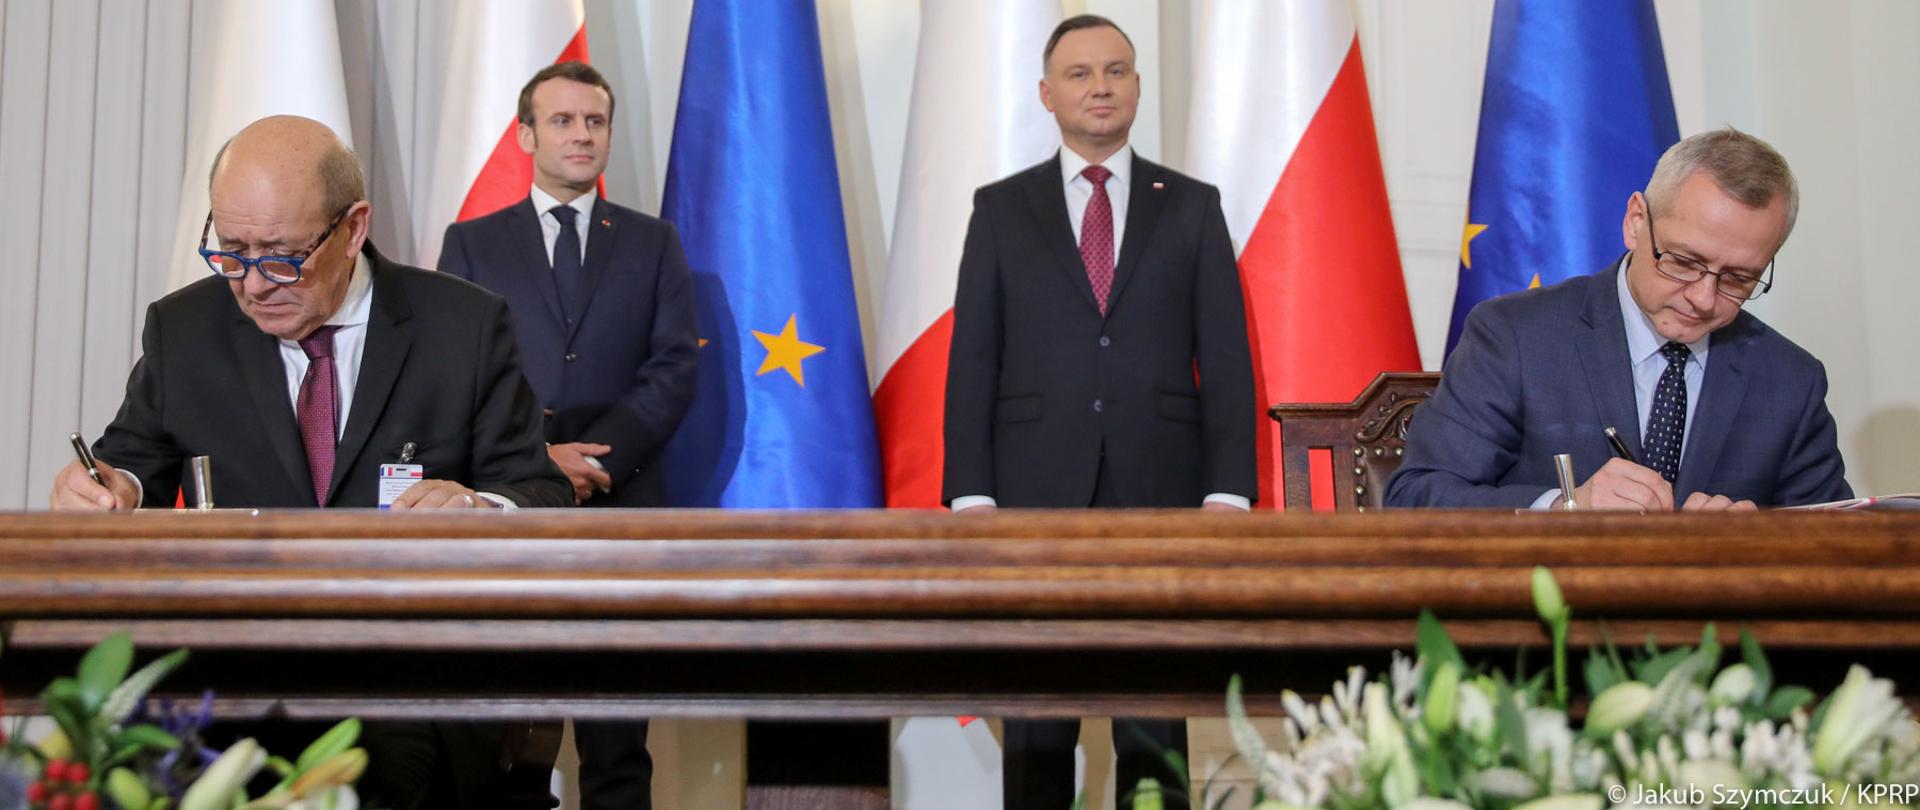 The moment of signing the declaration - at the table (on the left) the Minister of Europe and Foreign Affairs of France Jean-Yves Le Drian, (on the right) Minister of Digital Affairs Marek Zagórski. Behind them are: (on the left) President of France Emmanuel Macron, (on the right) President of the Republic of Poland Andrzej Duda